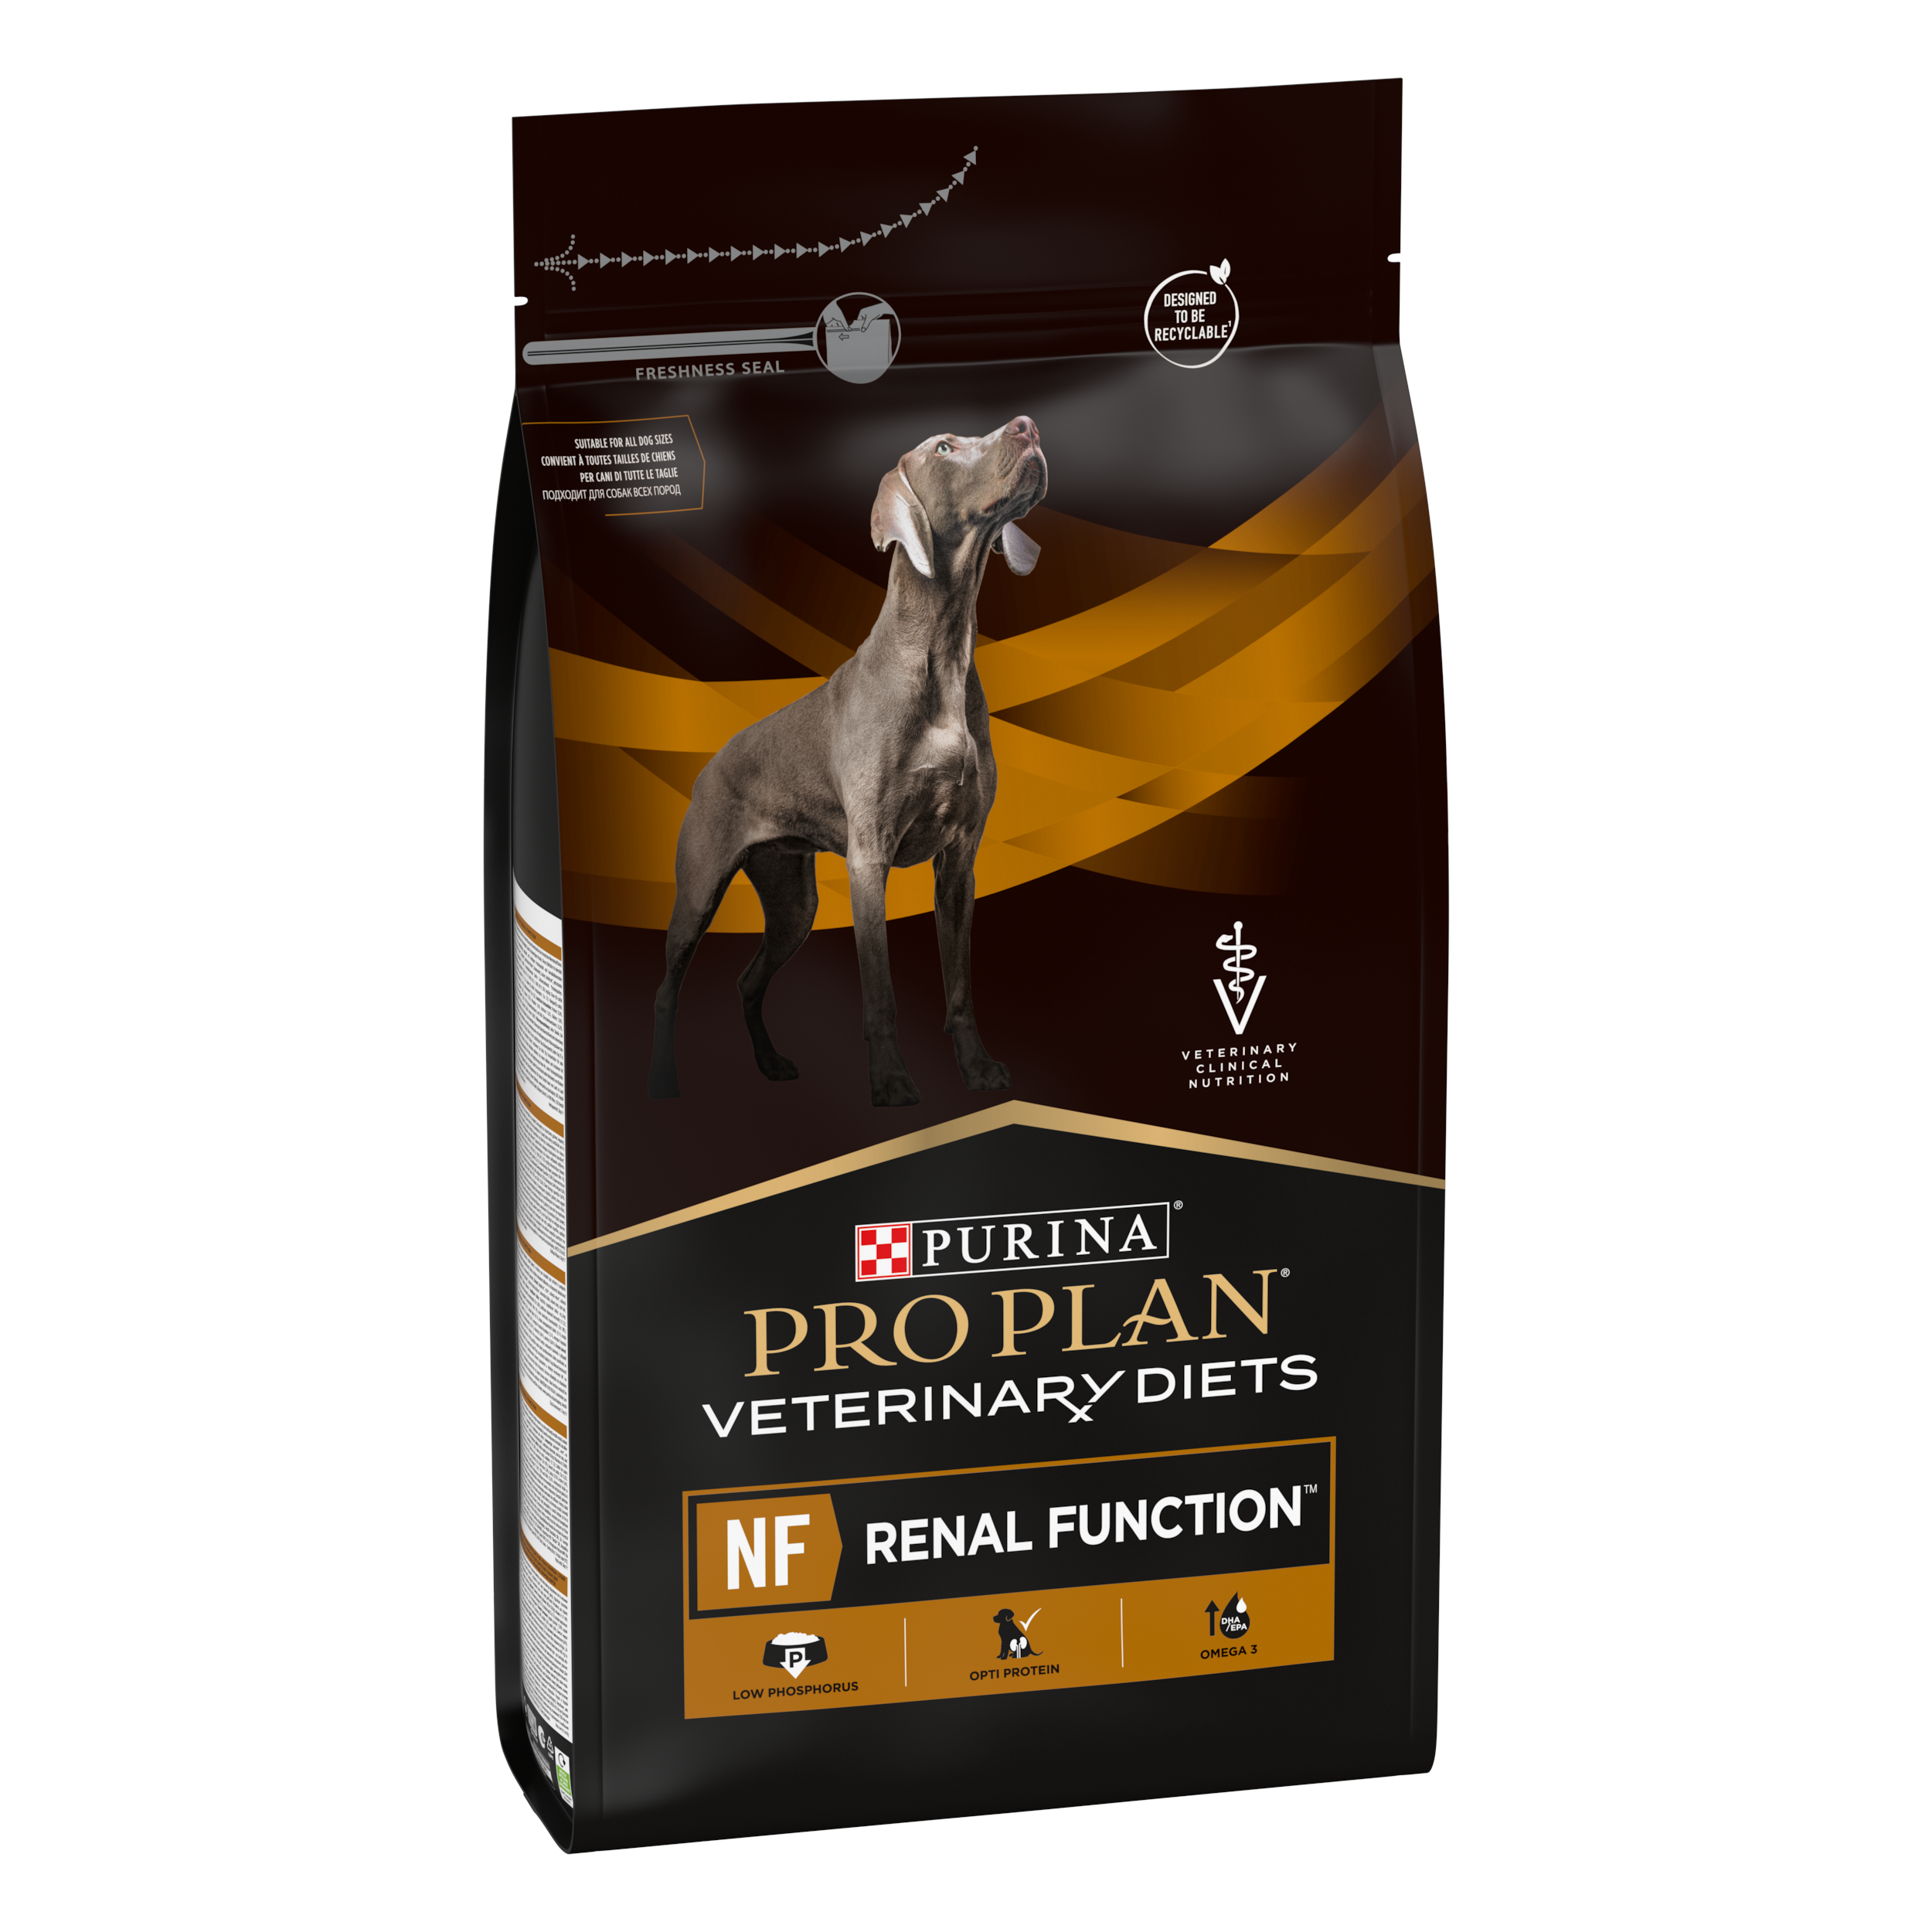 PURINA PRO PLAN VETERINARY DIETS NF Renal Function, 3 kg Caini